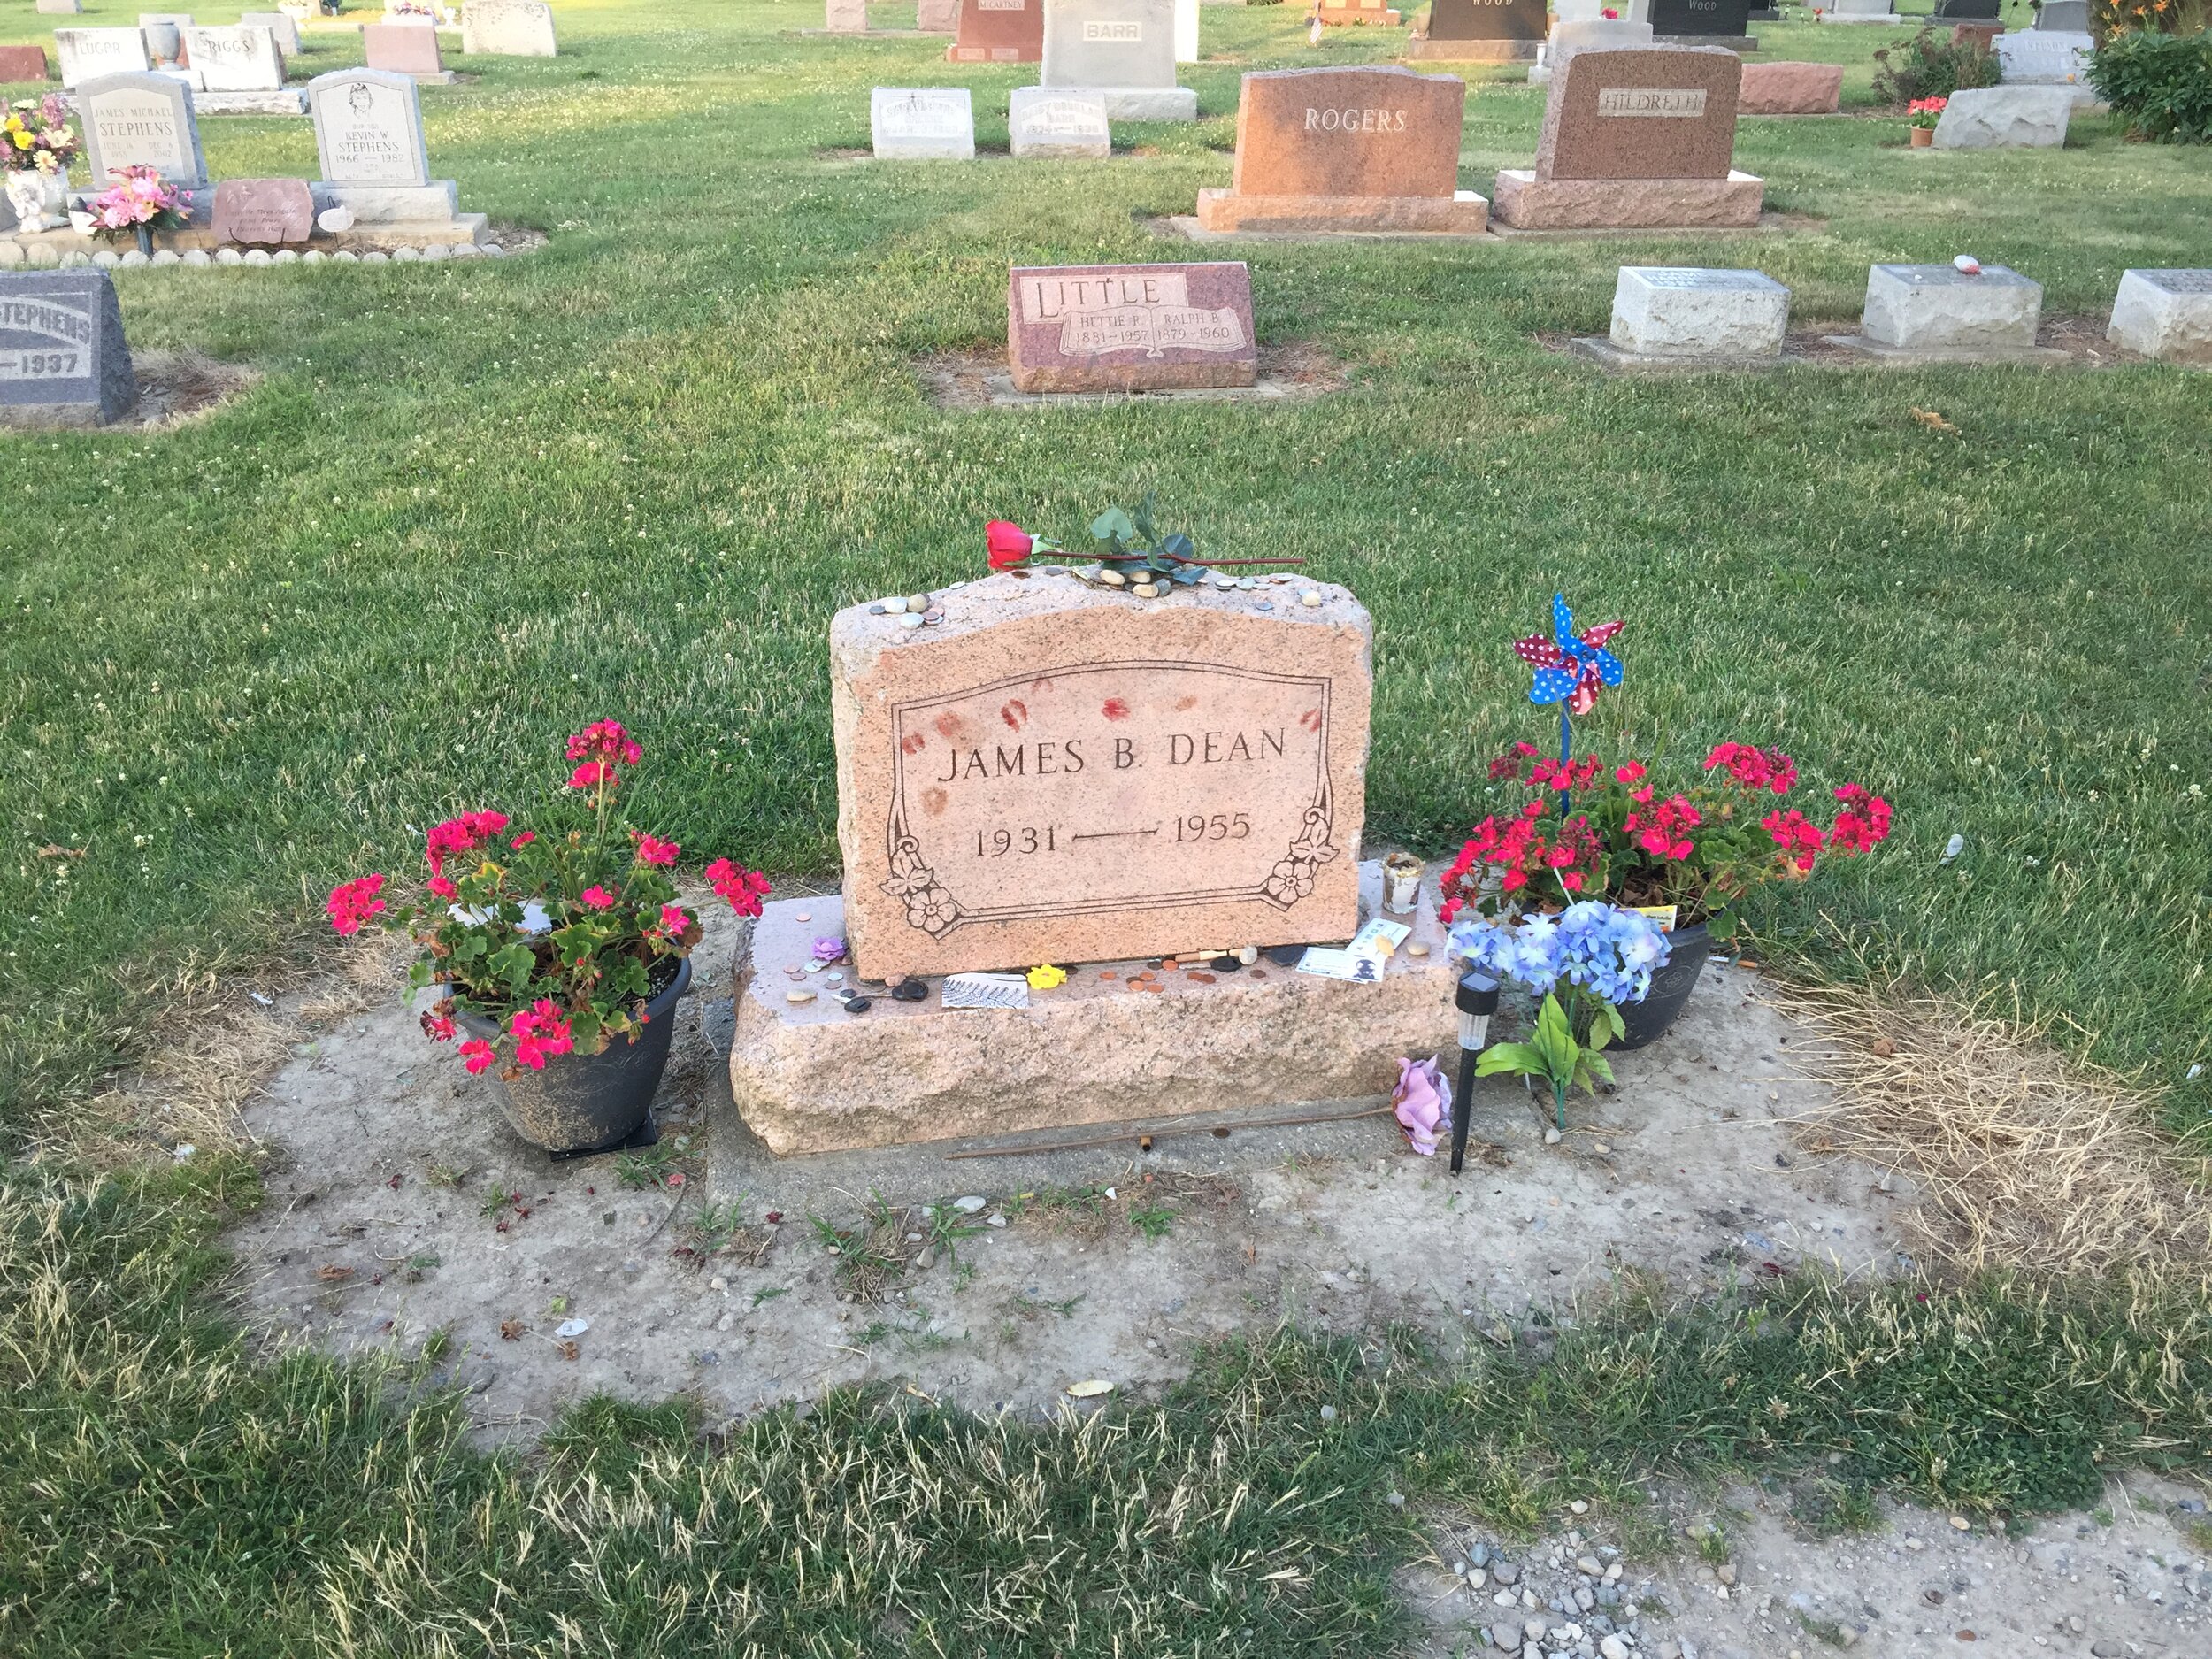  James Dean’s headstone as it looked in 2016.  ©2016 Jill and Roger Pingleton. 